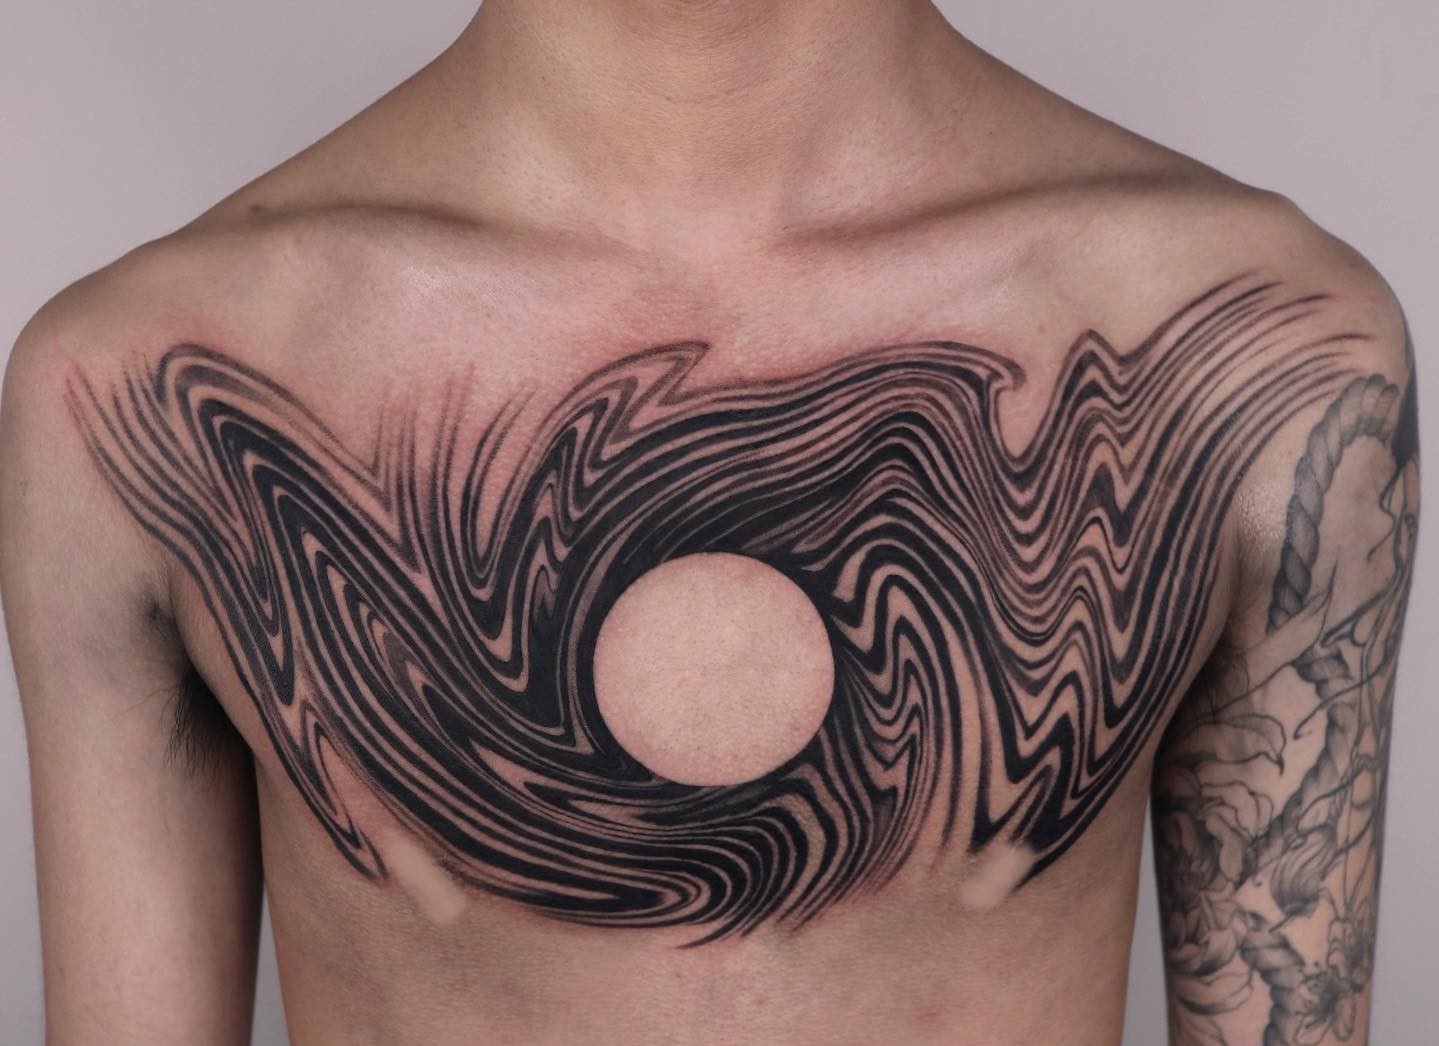 Chest Tattoo Pain - How Bad Is It & How To Reduce It In 2023 - alexie